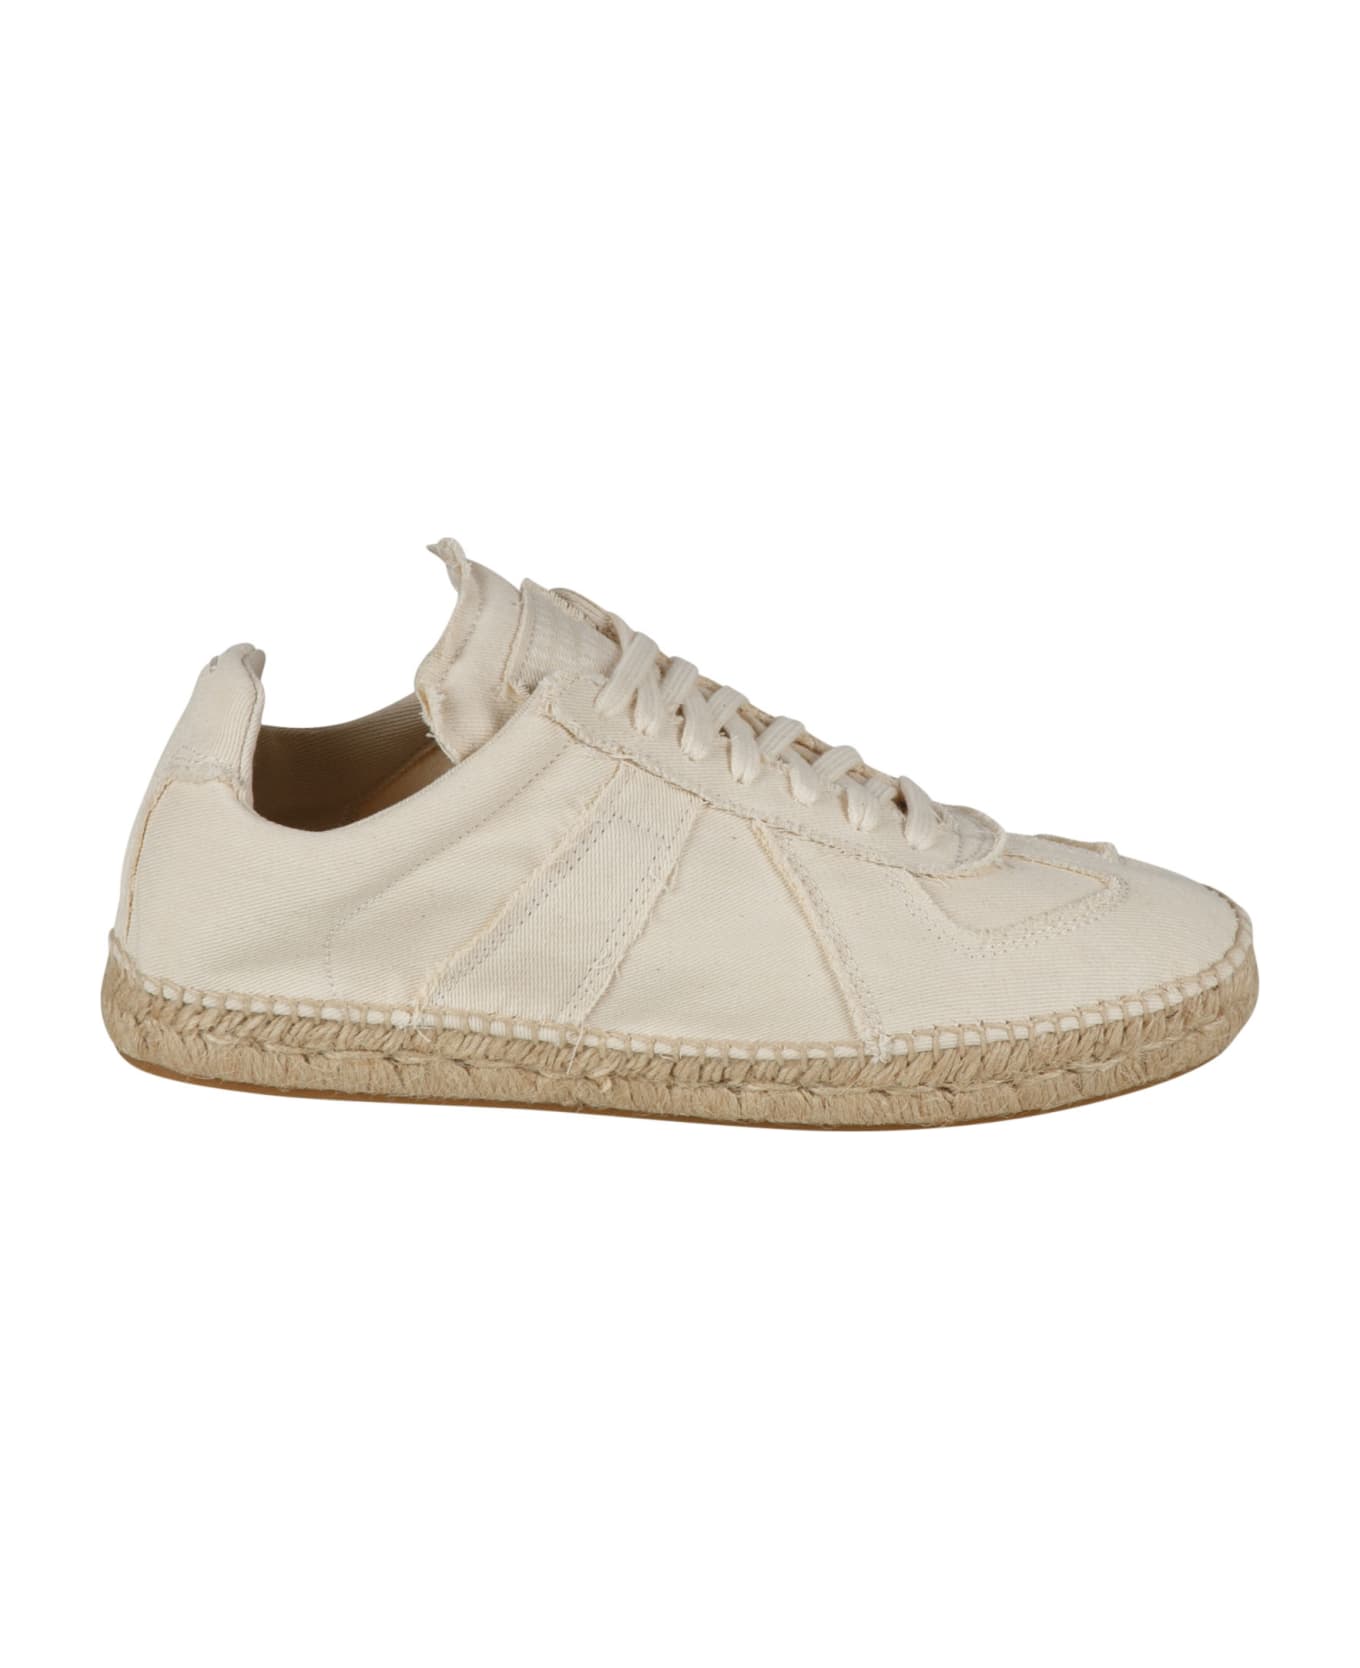 Maison Margiela Low-top Lace Up Sneakers - Birch White